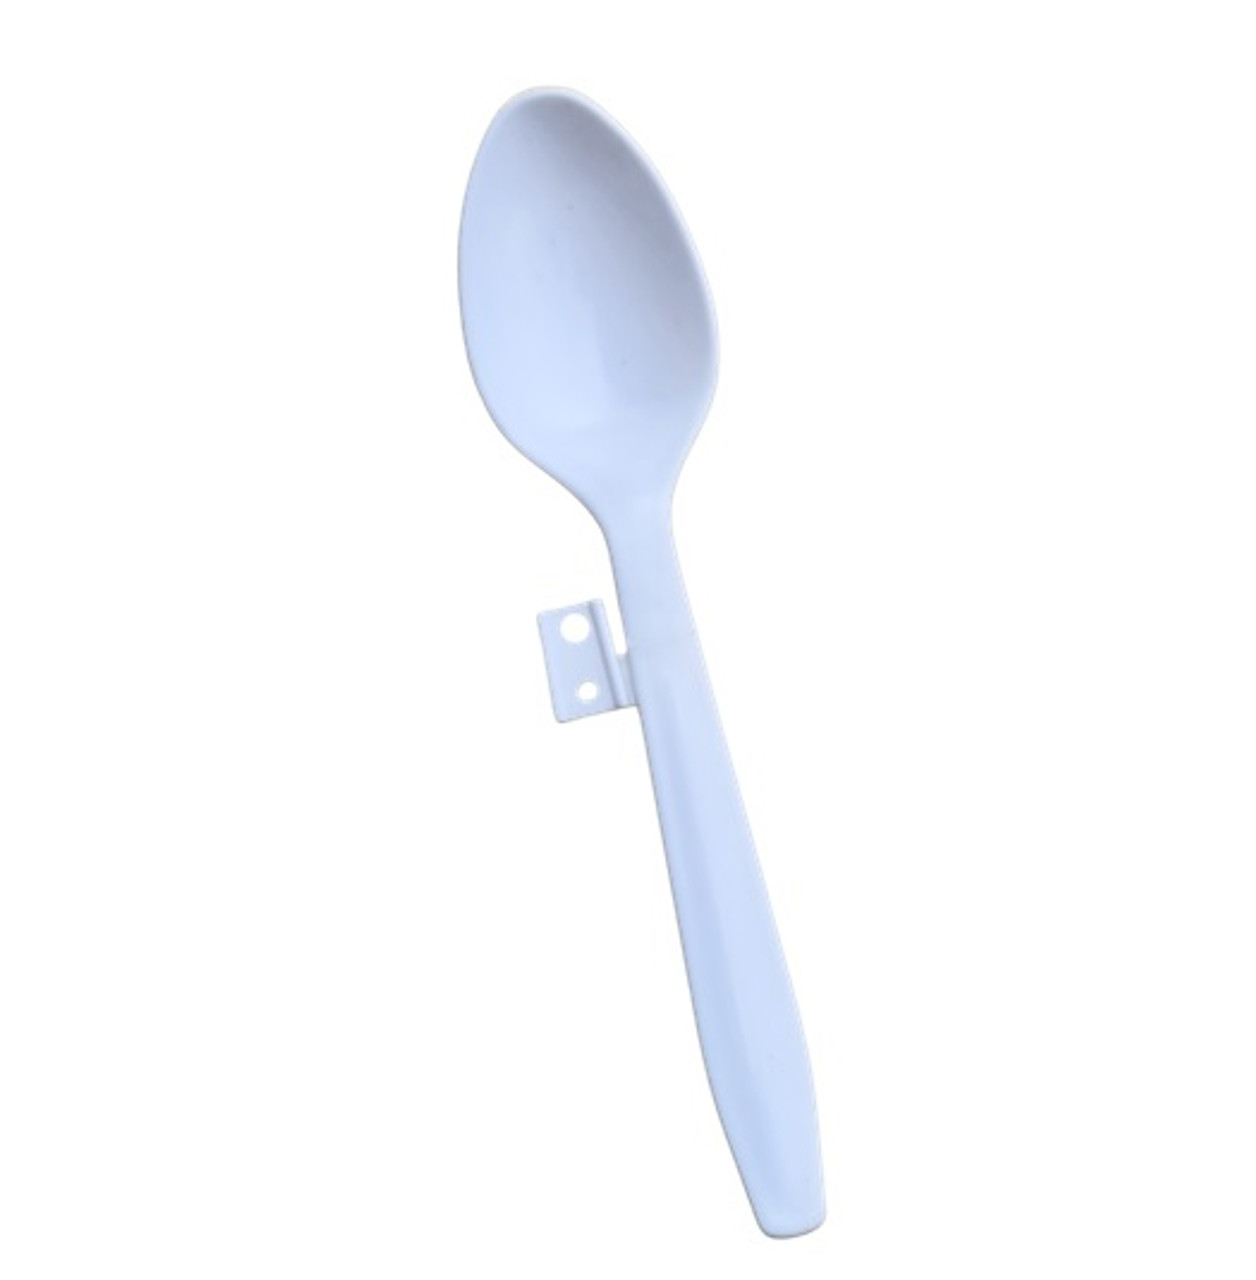 Individually Wrapped - Re-usable, Heavy Duty, Durable white folding  Dessert Spoons (see quantity options)